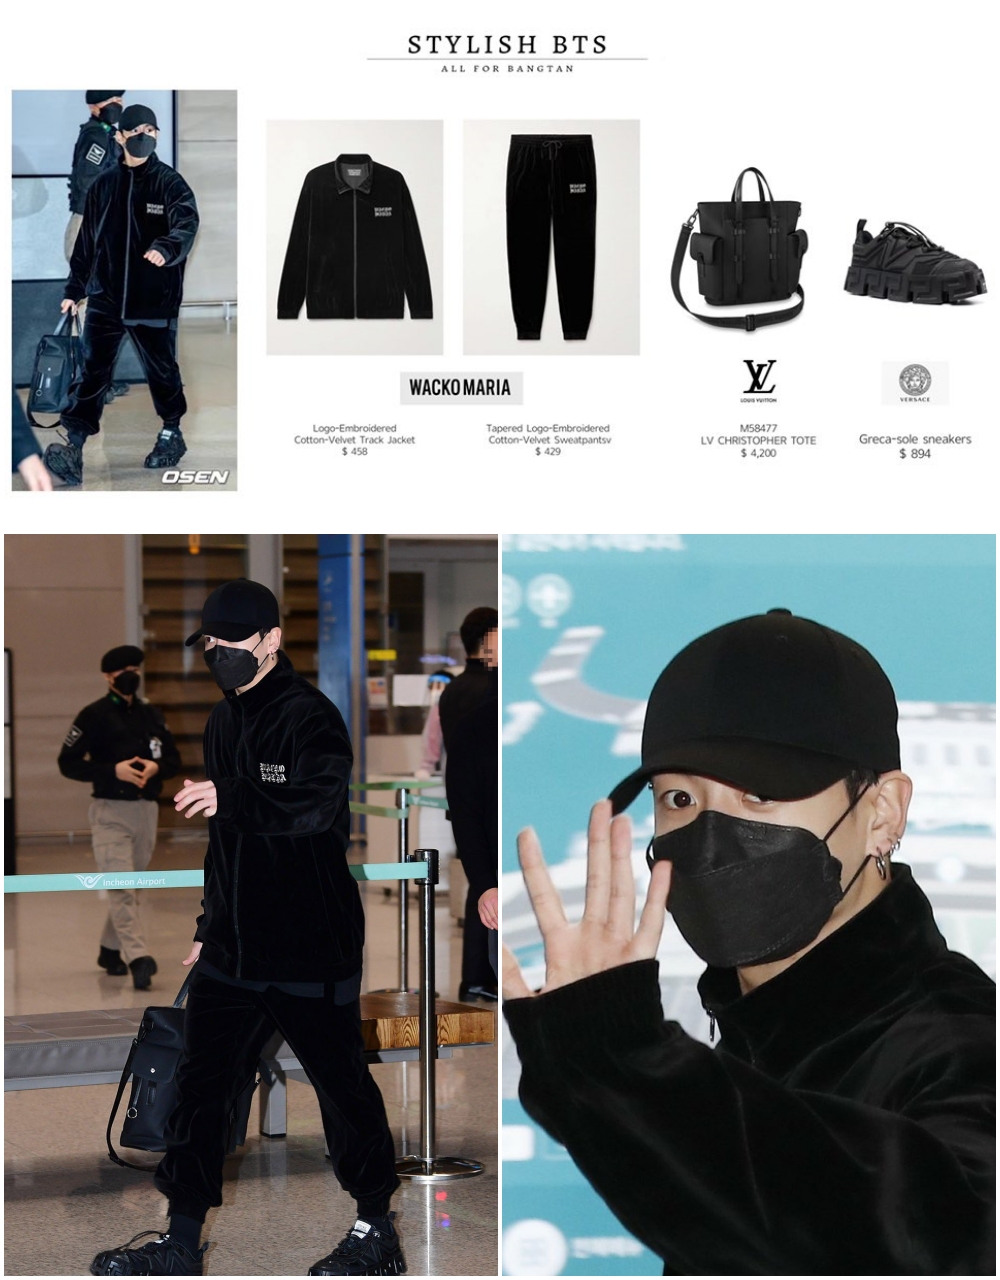 That all black airport fashion look of - BTS Jeon Jungkook